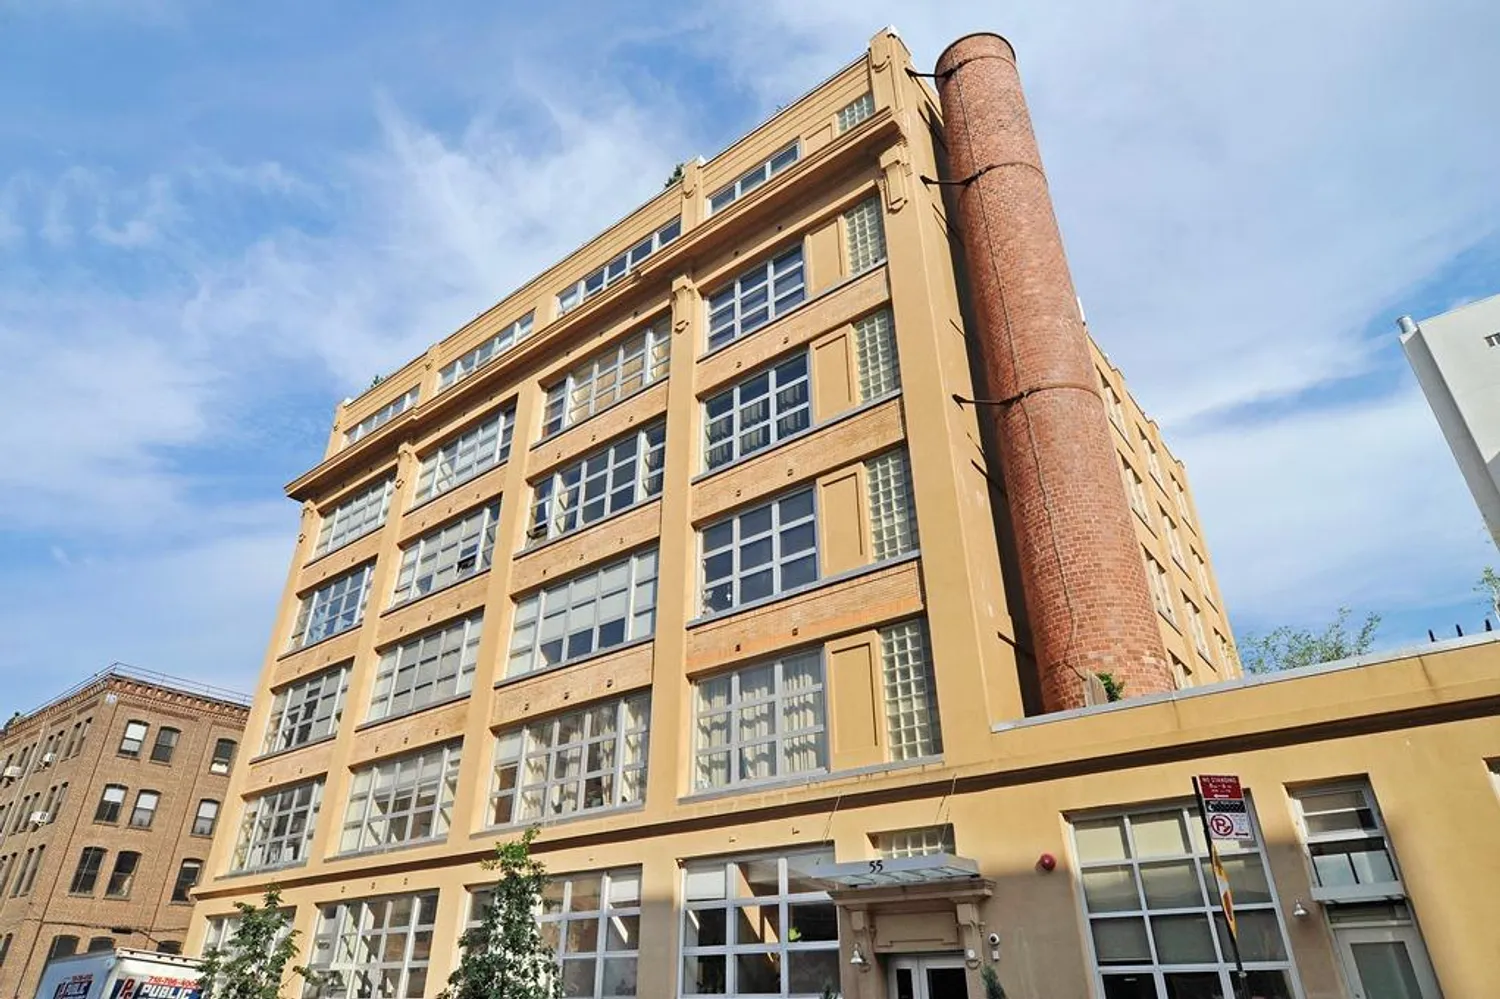 55 Berry Street, former factory building